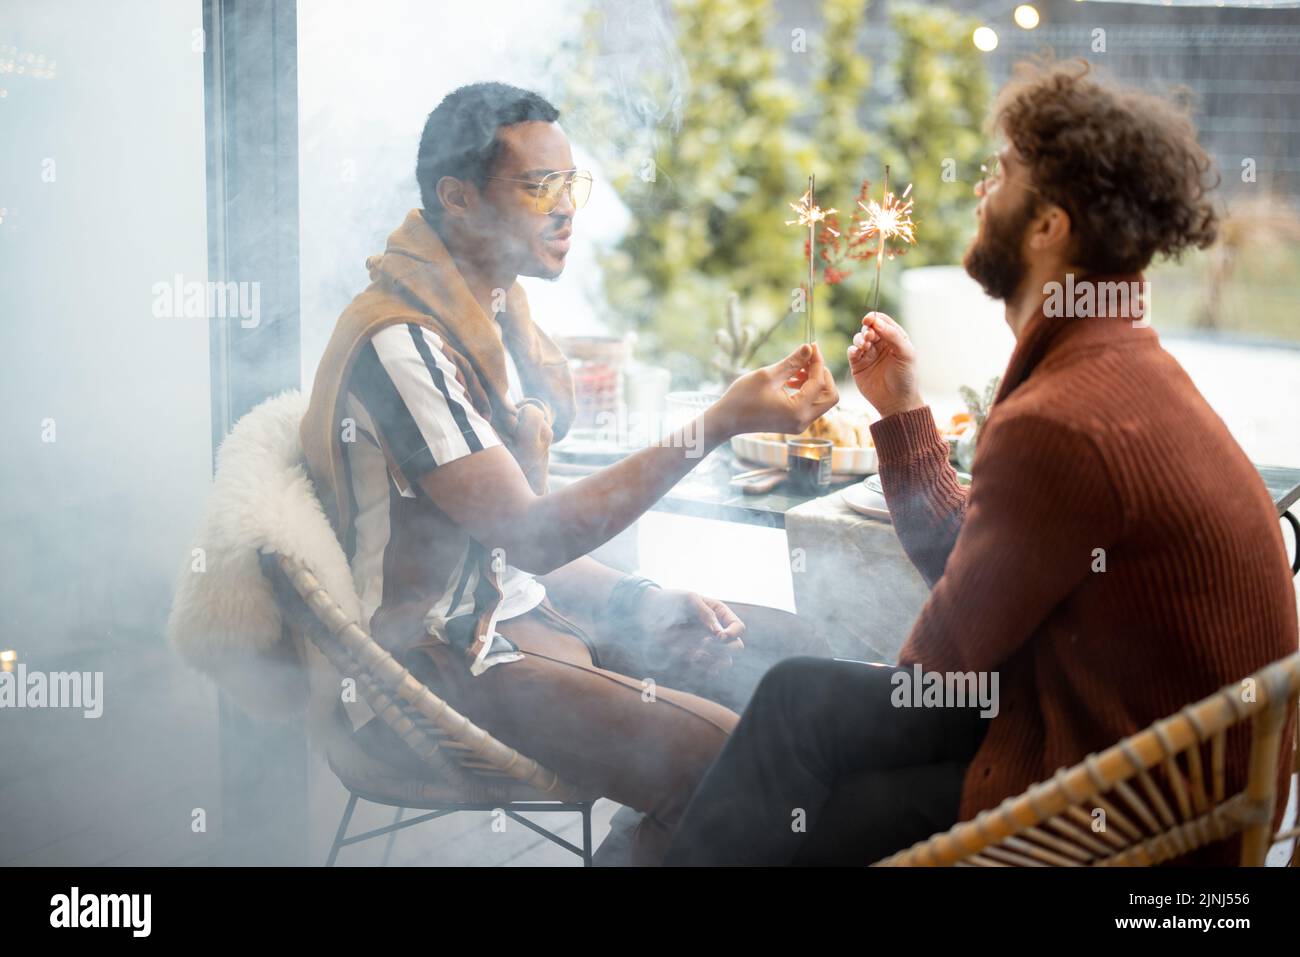 Two male friends having fun burning sparklers, during a festive dinner at backyard. Caucasian and hispanic man celebrating together. Idea of gay coupl Stock Photo